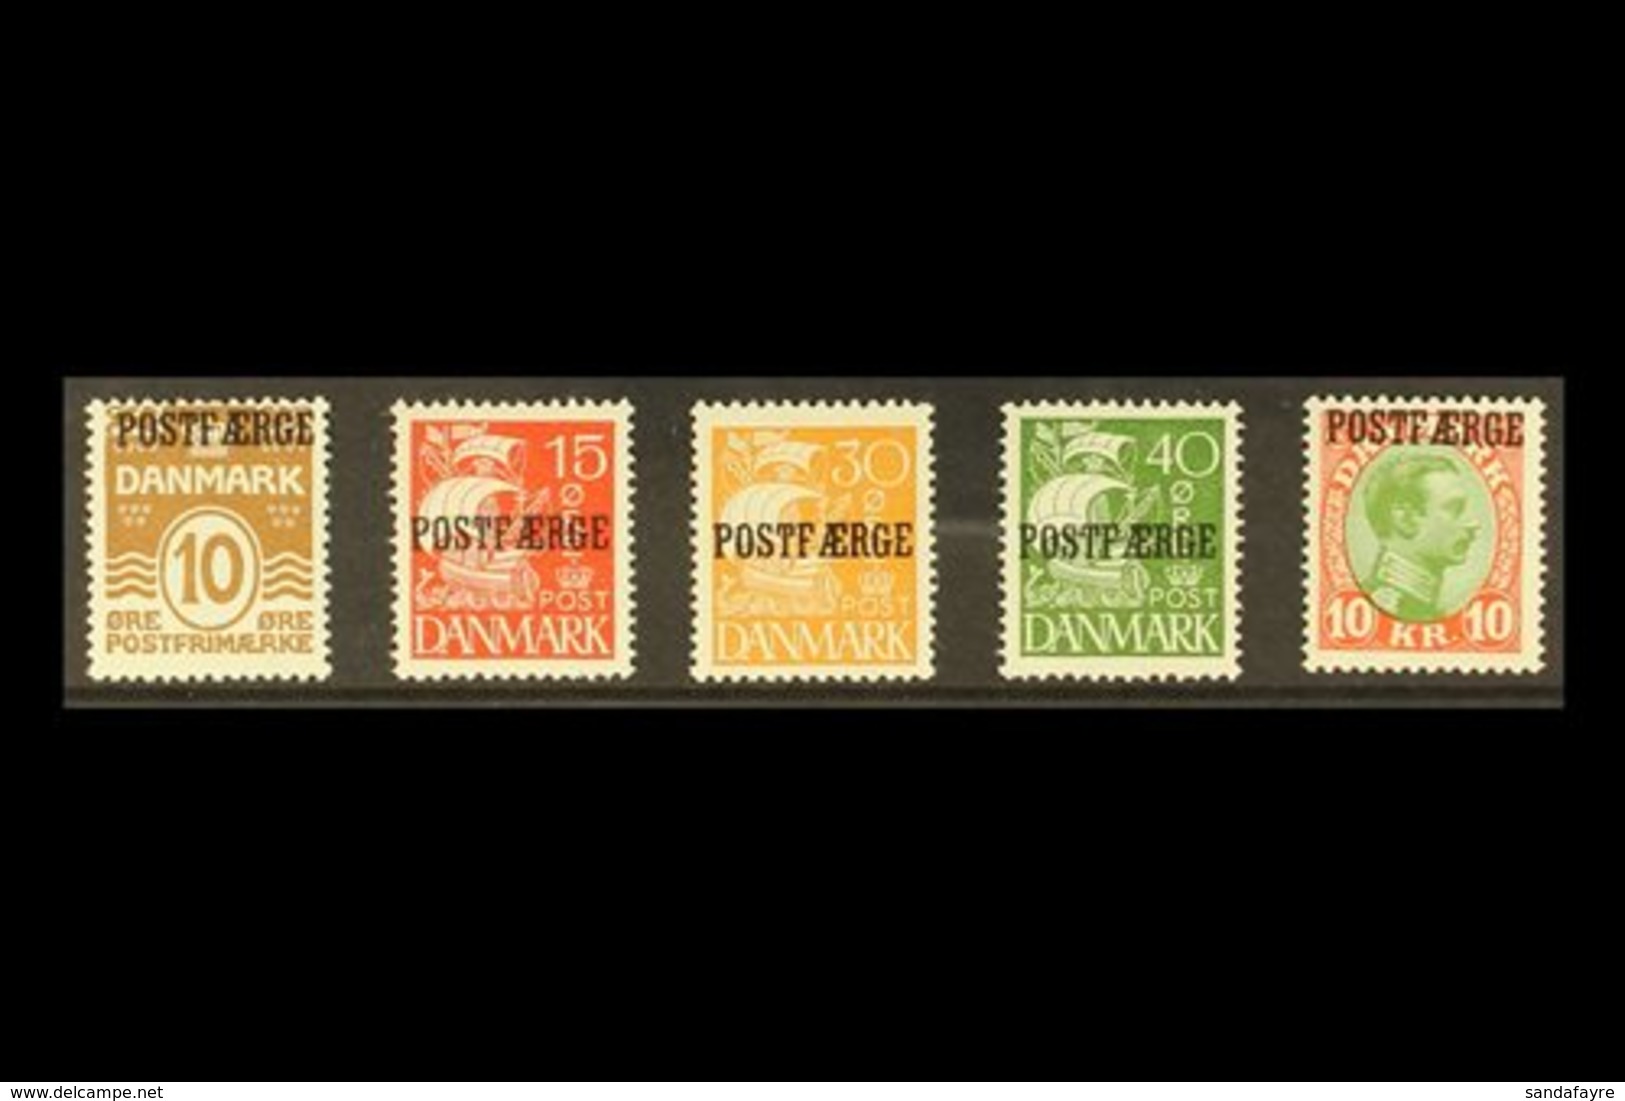 PARCEL POST 1927-30 10 Ore, 15 Ore, 30 Ore, 40 Ore, And 1kr With "POSTFAERGE" Overprints Complete Set, Michel 11/15, Ver - Other & Unclassified